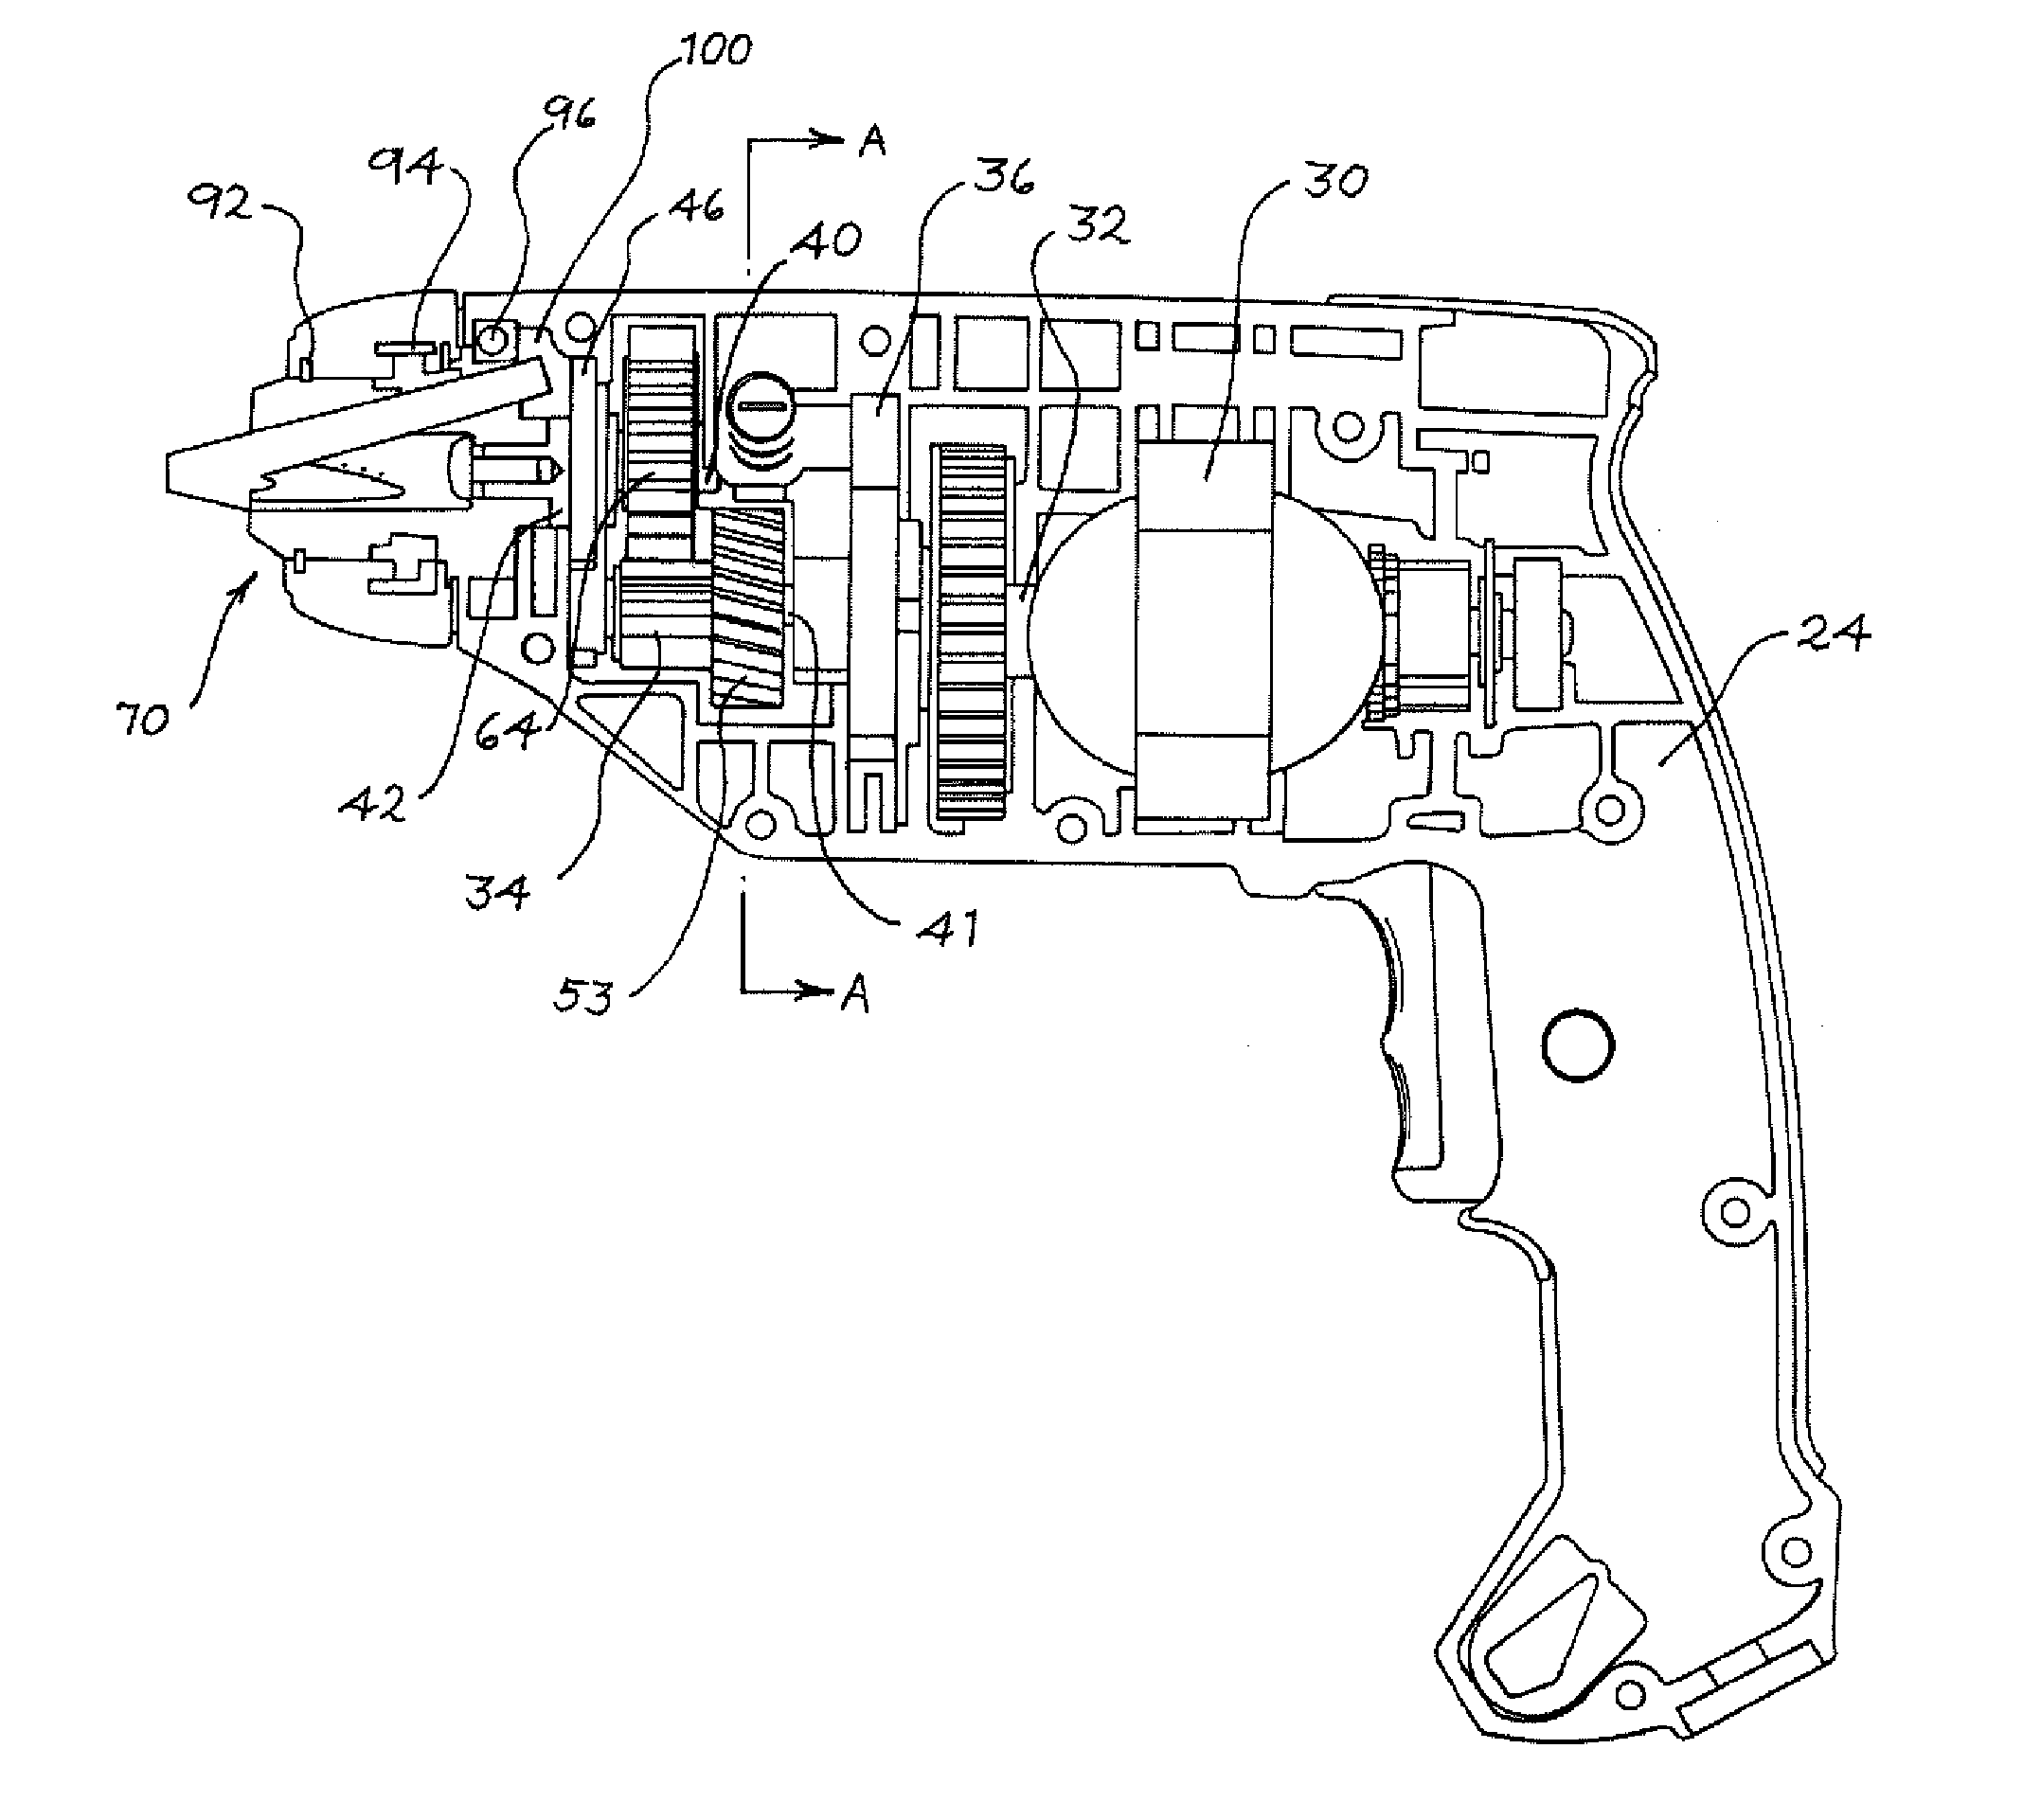 Multi-Speed Drill and Chuck Assembly